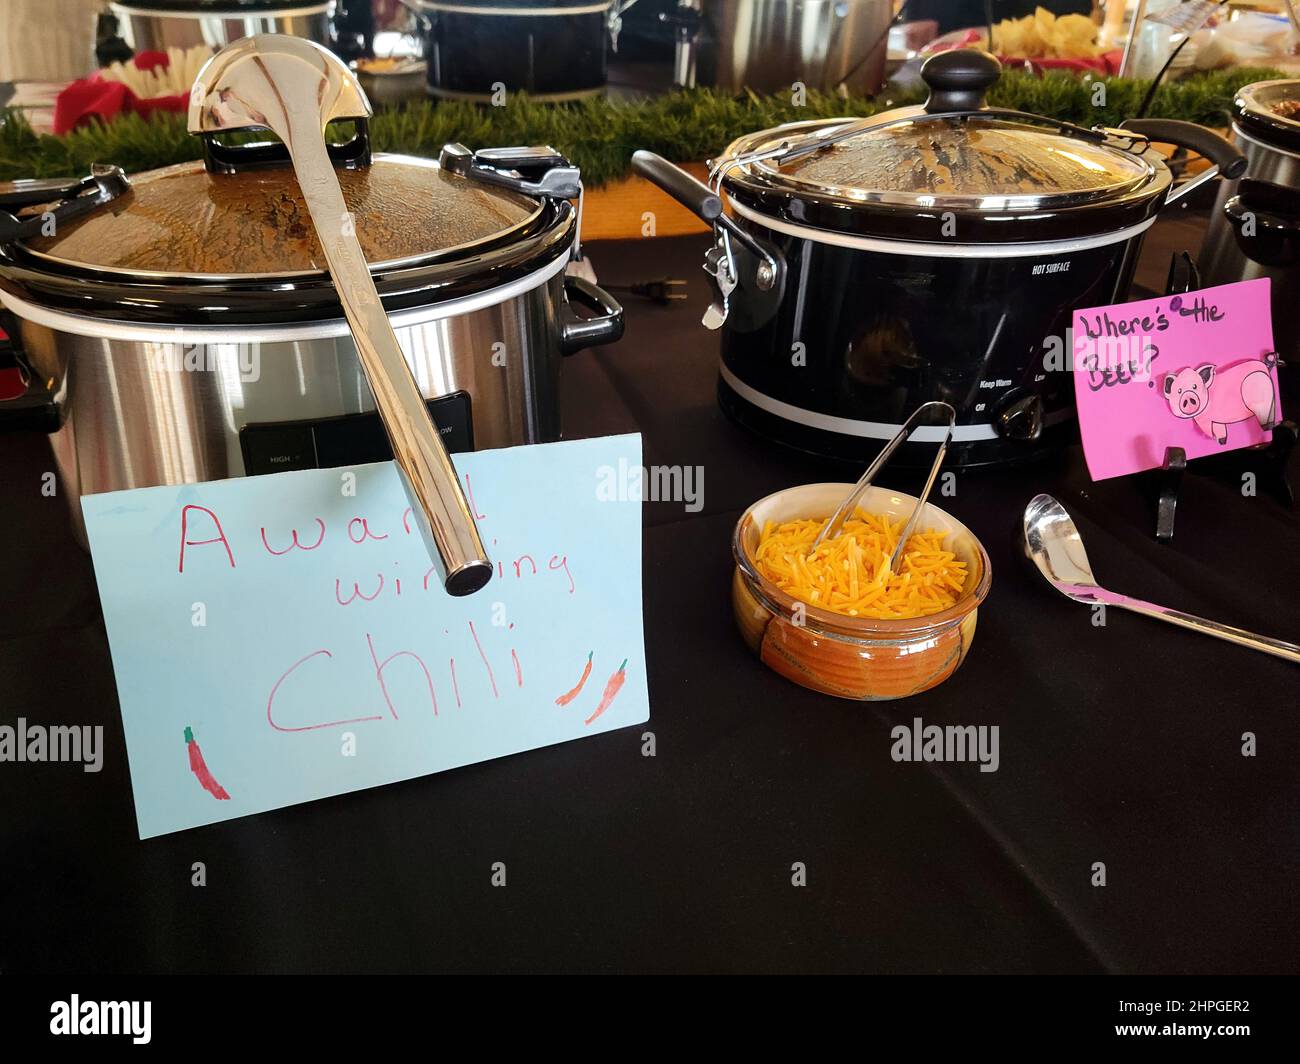 A row of crockpots on a tablecloth in a chili cook-off contest Stock Photo